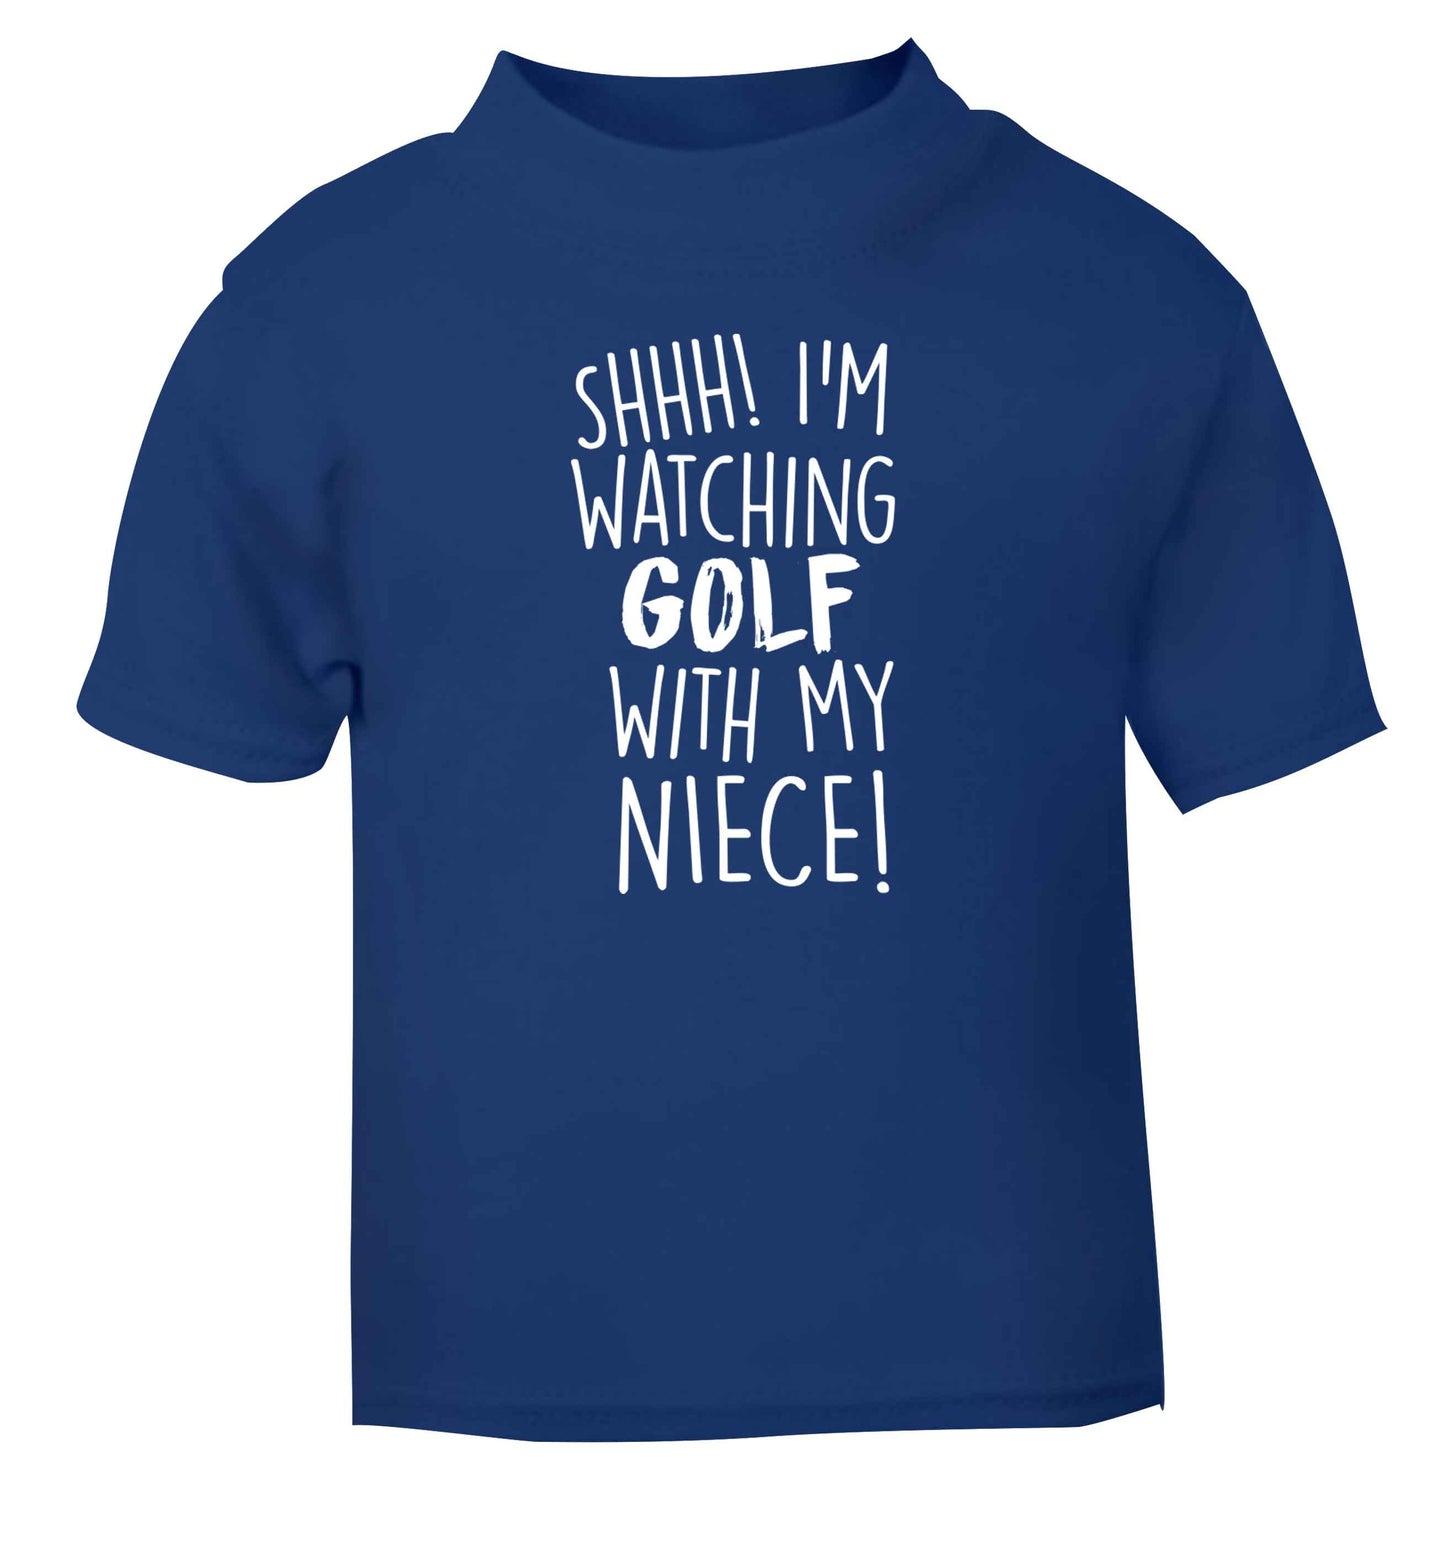 Shh I'm watching golf with my niece blue Baby Toddler Tshirt 2 Years